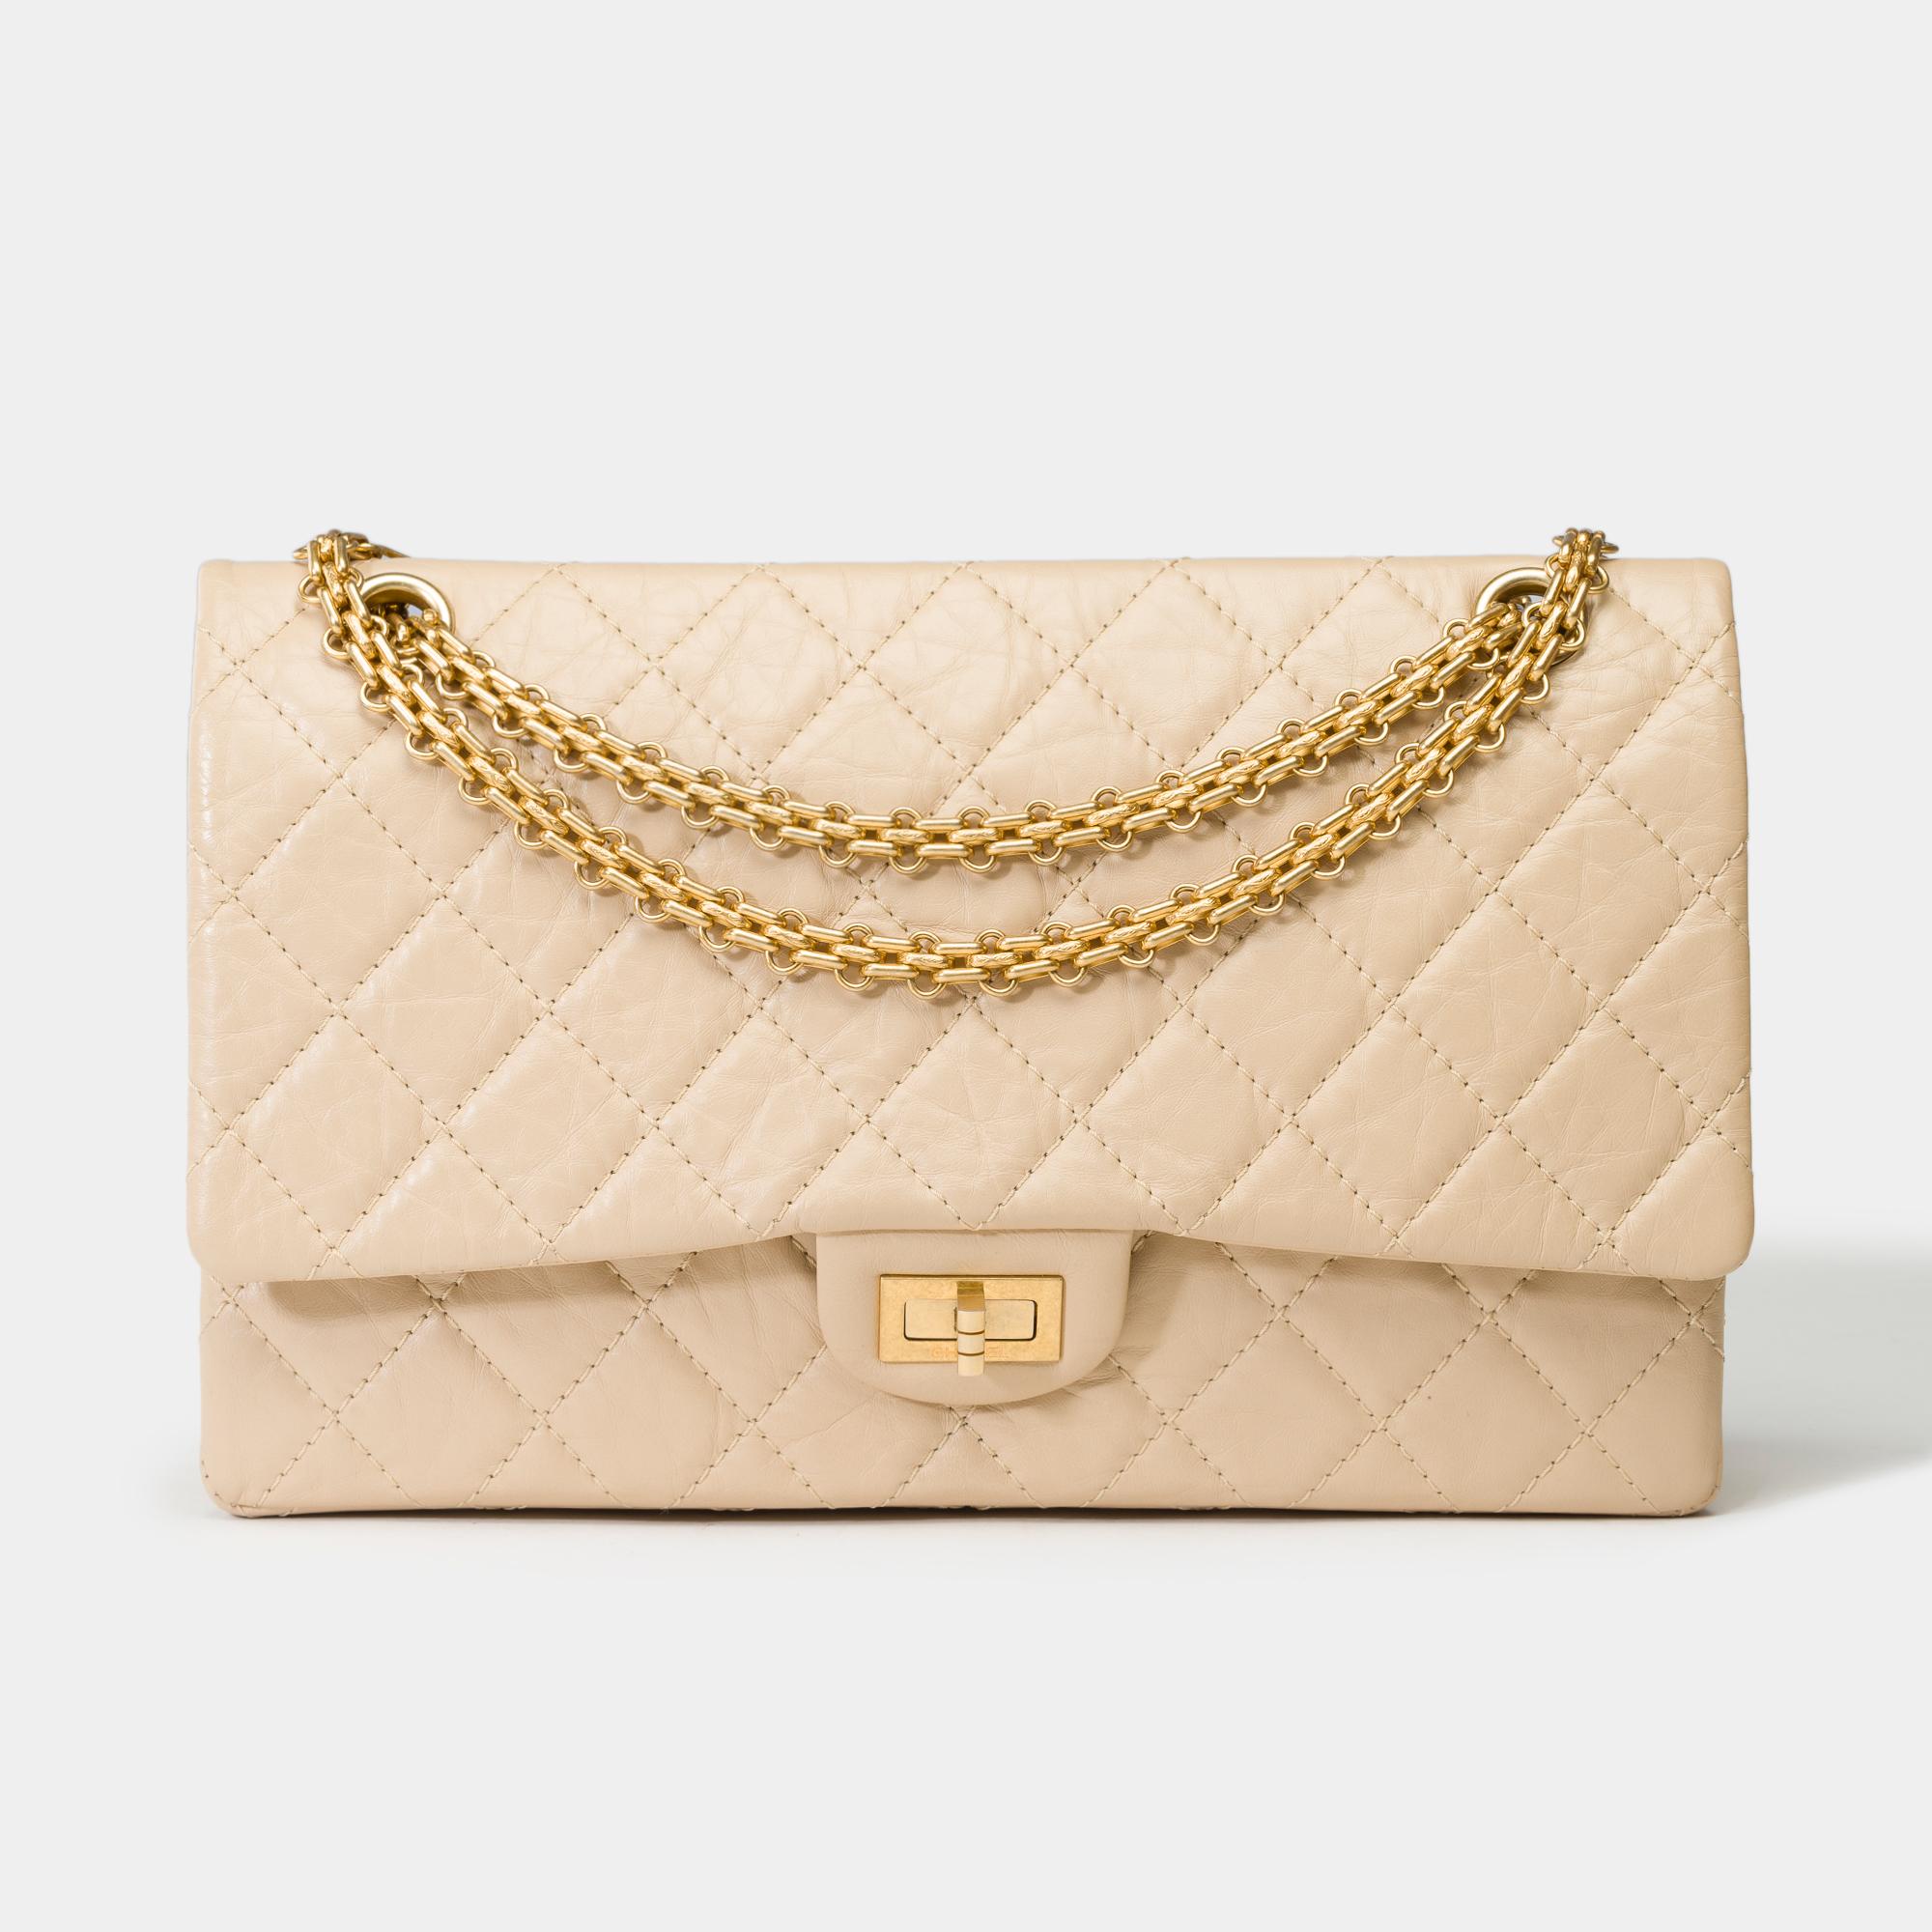 Iconic Chanel 2.55 double flap shoulder bag in quilted beige leather, GHW In Excellent Condition For Sale In Paris, IDF